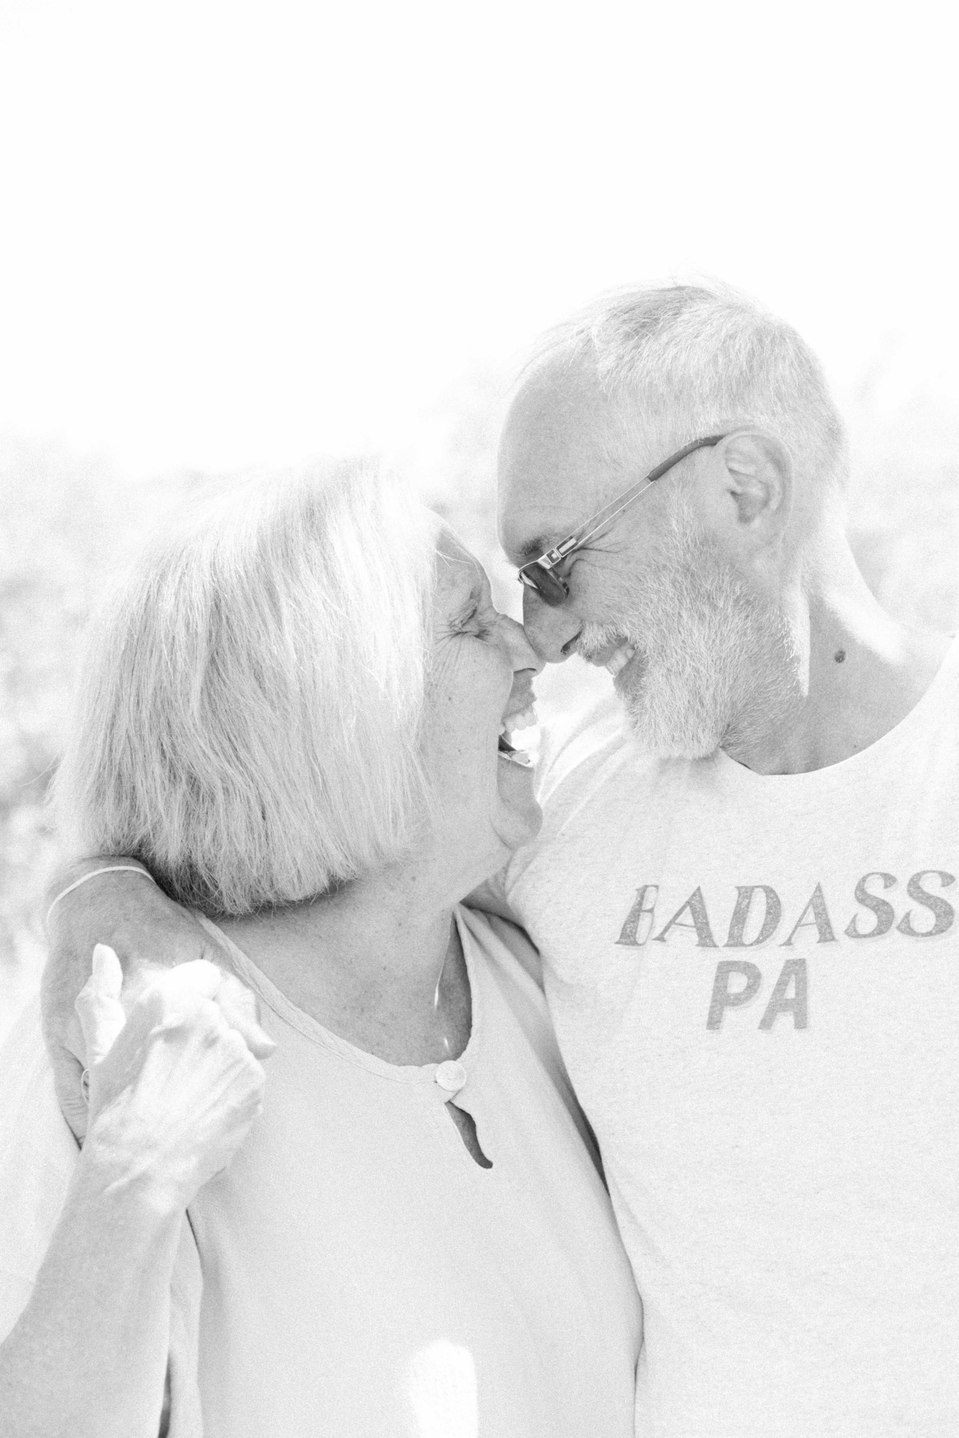 Black & white portrait of husband and wife looking at each other touching noses, Niagara portrait photographer, Niagara family photographer, portrait photography, family photography, candid photography, authentic photography, Emily VanderBeek Photography.